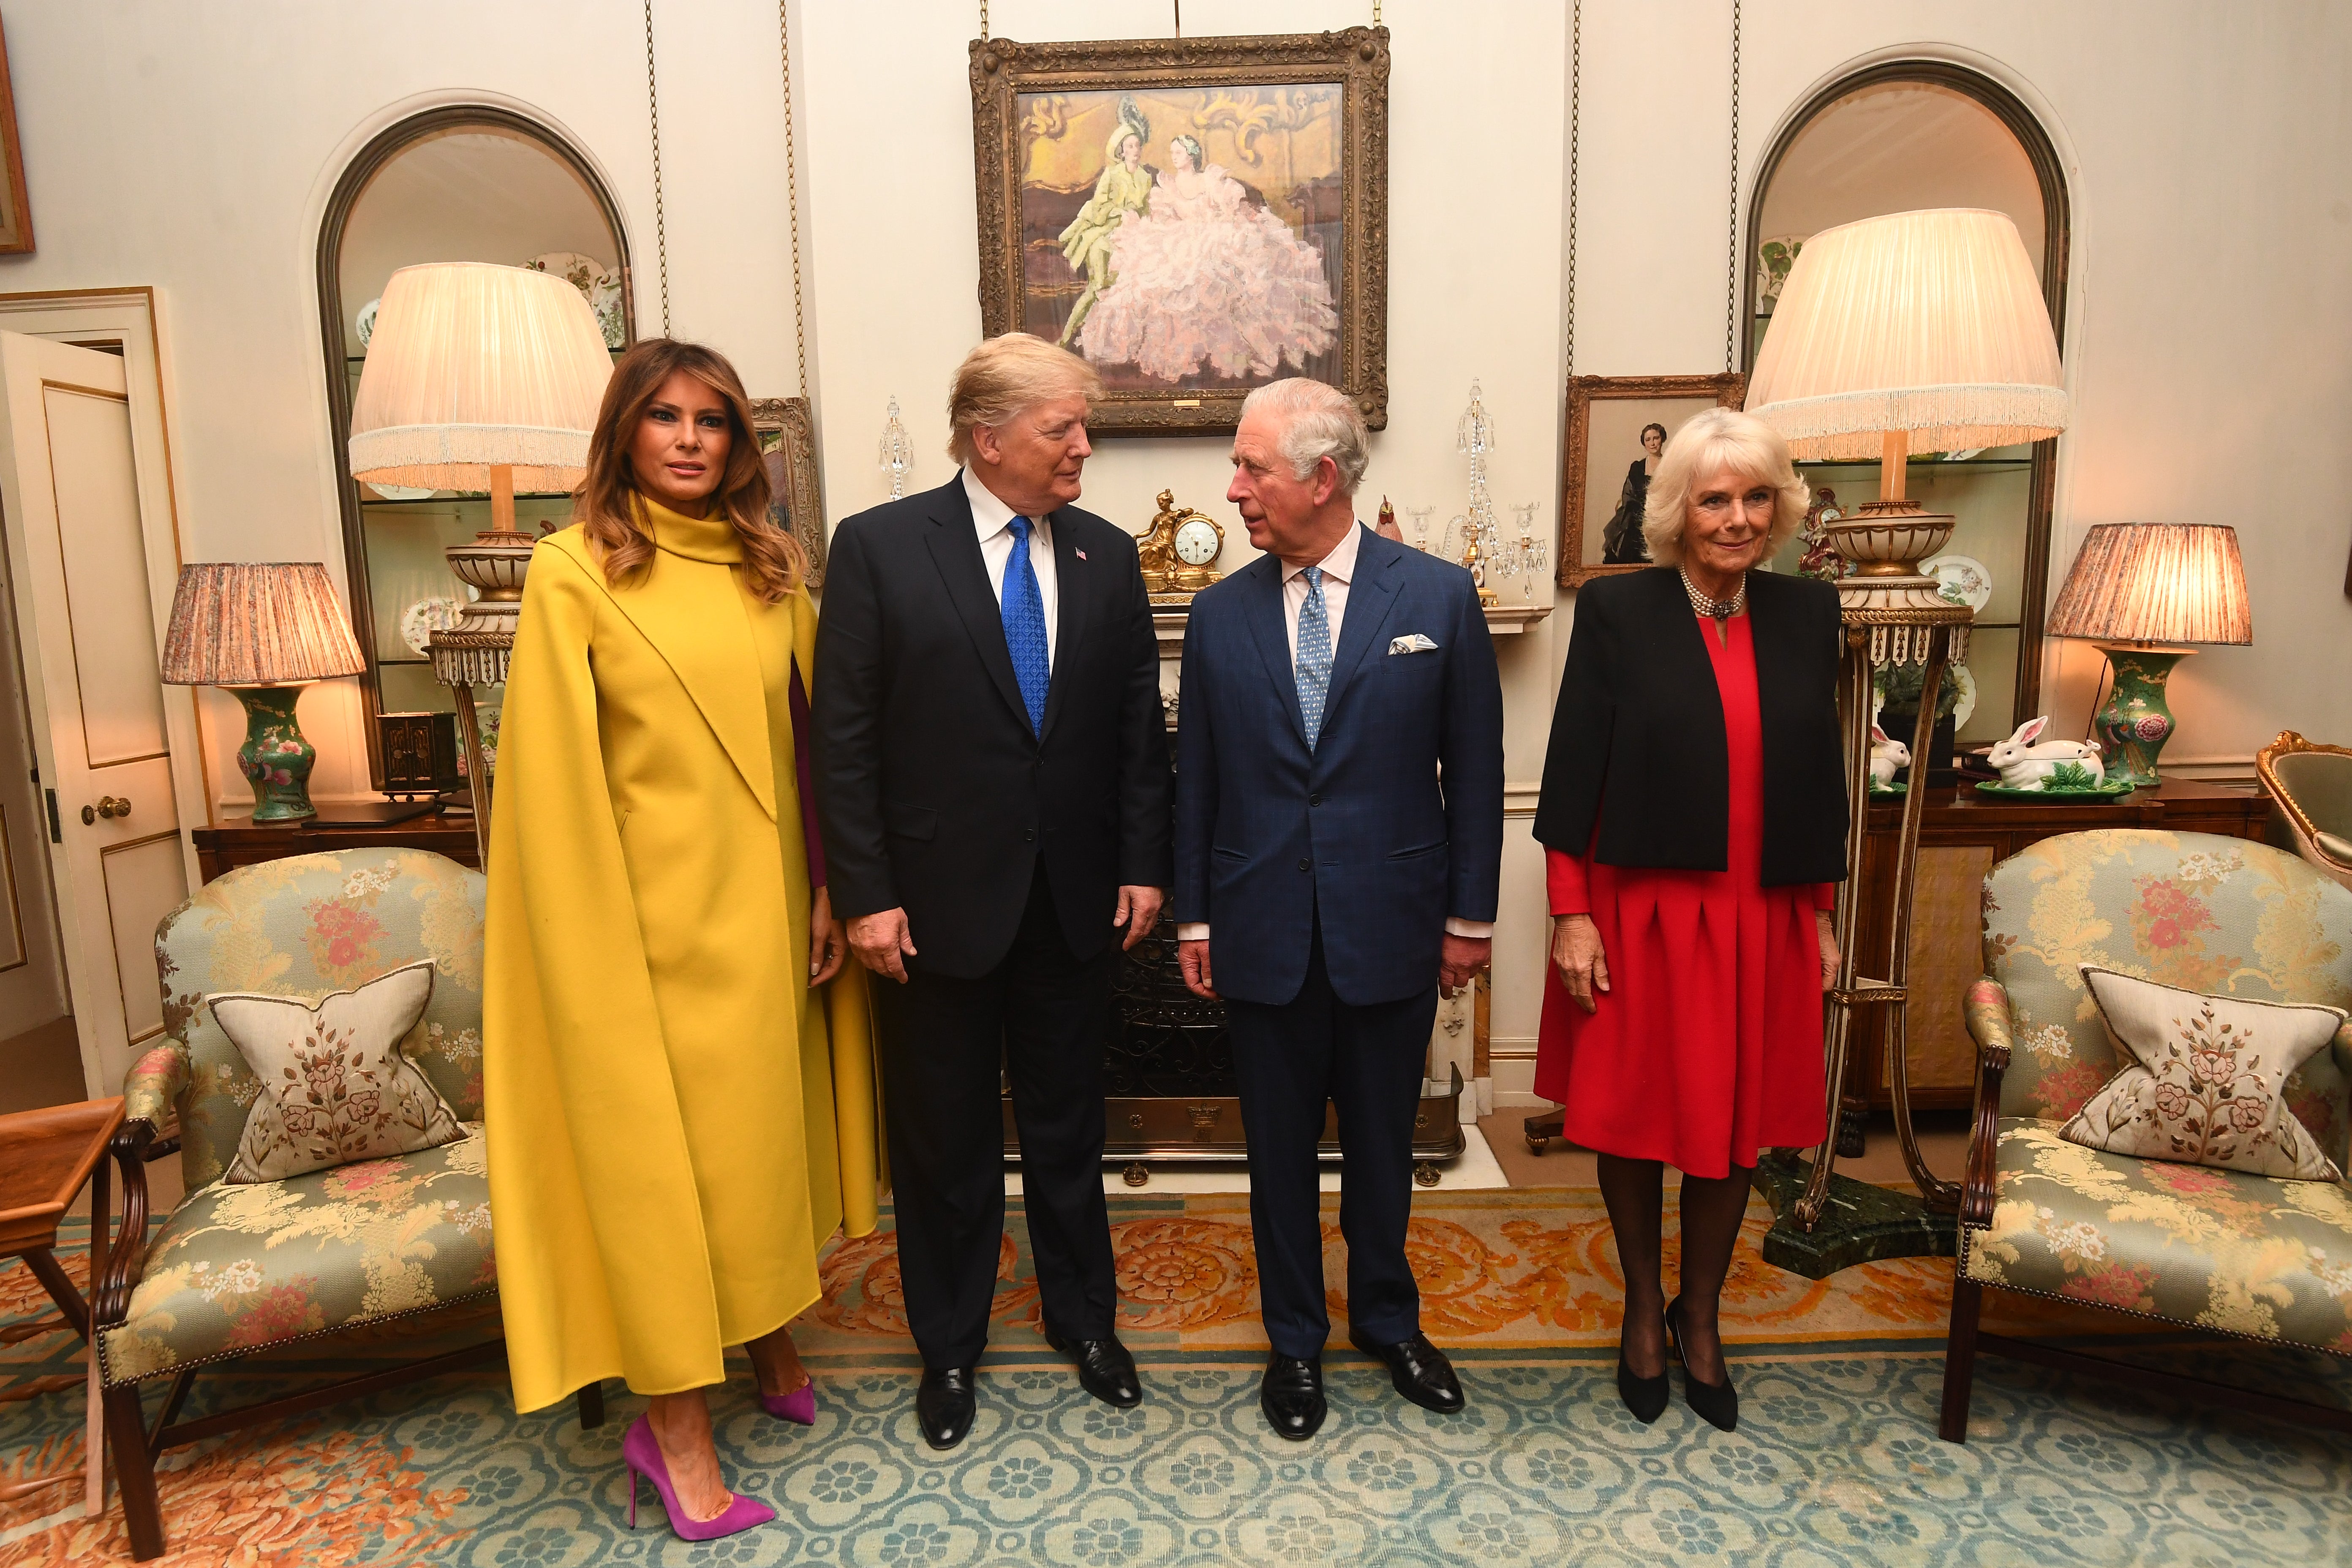 Charles, Prince of Wales, and Camilla, Duchess of Cornwall, meet former president Donald Trump and former first lady Melania Trump at Clarence House on 3 December 2019